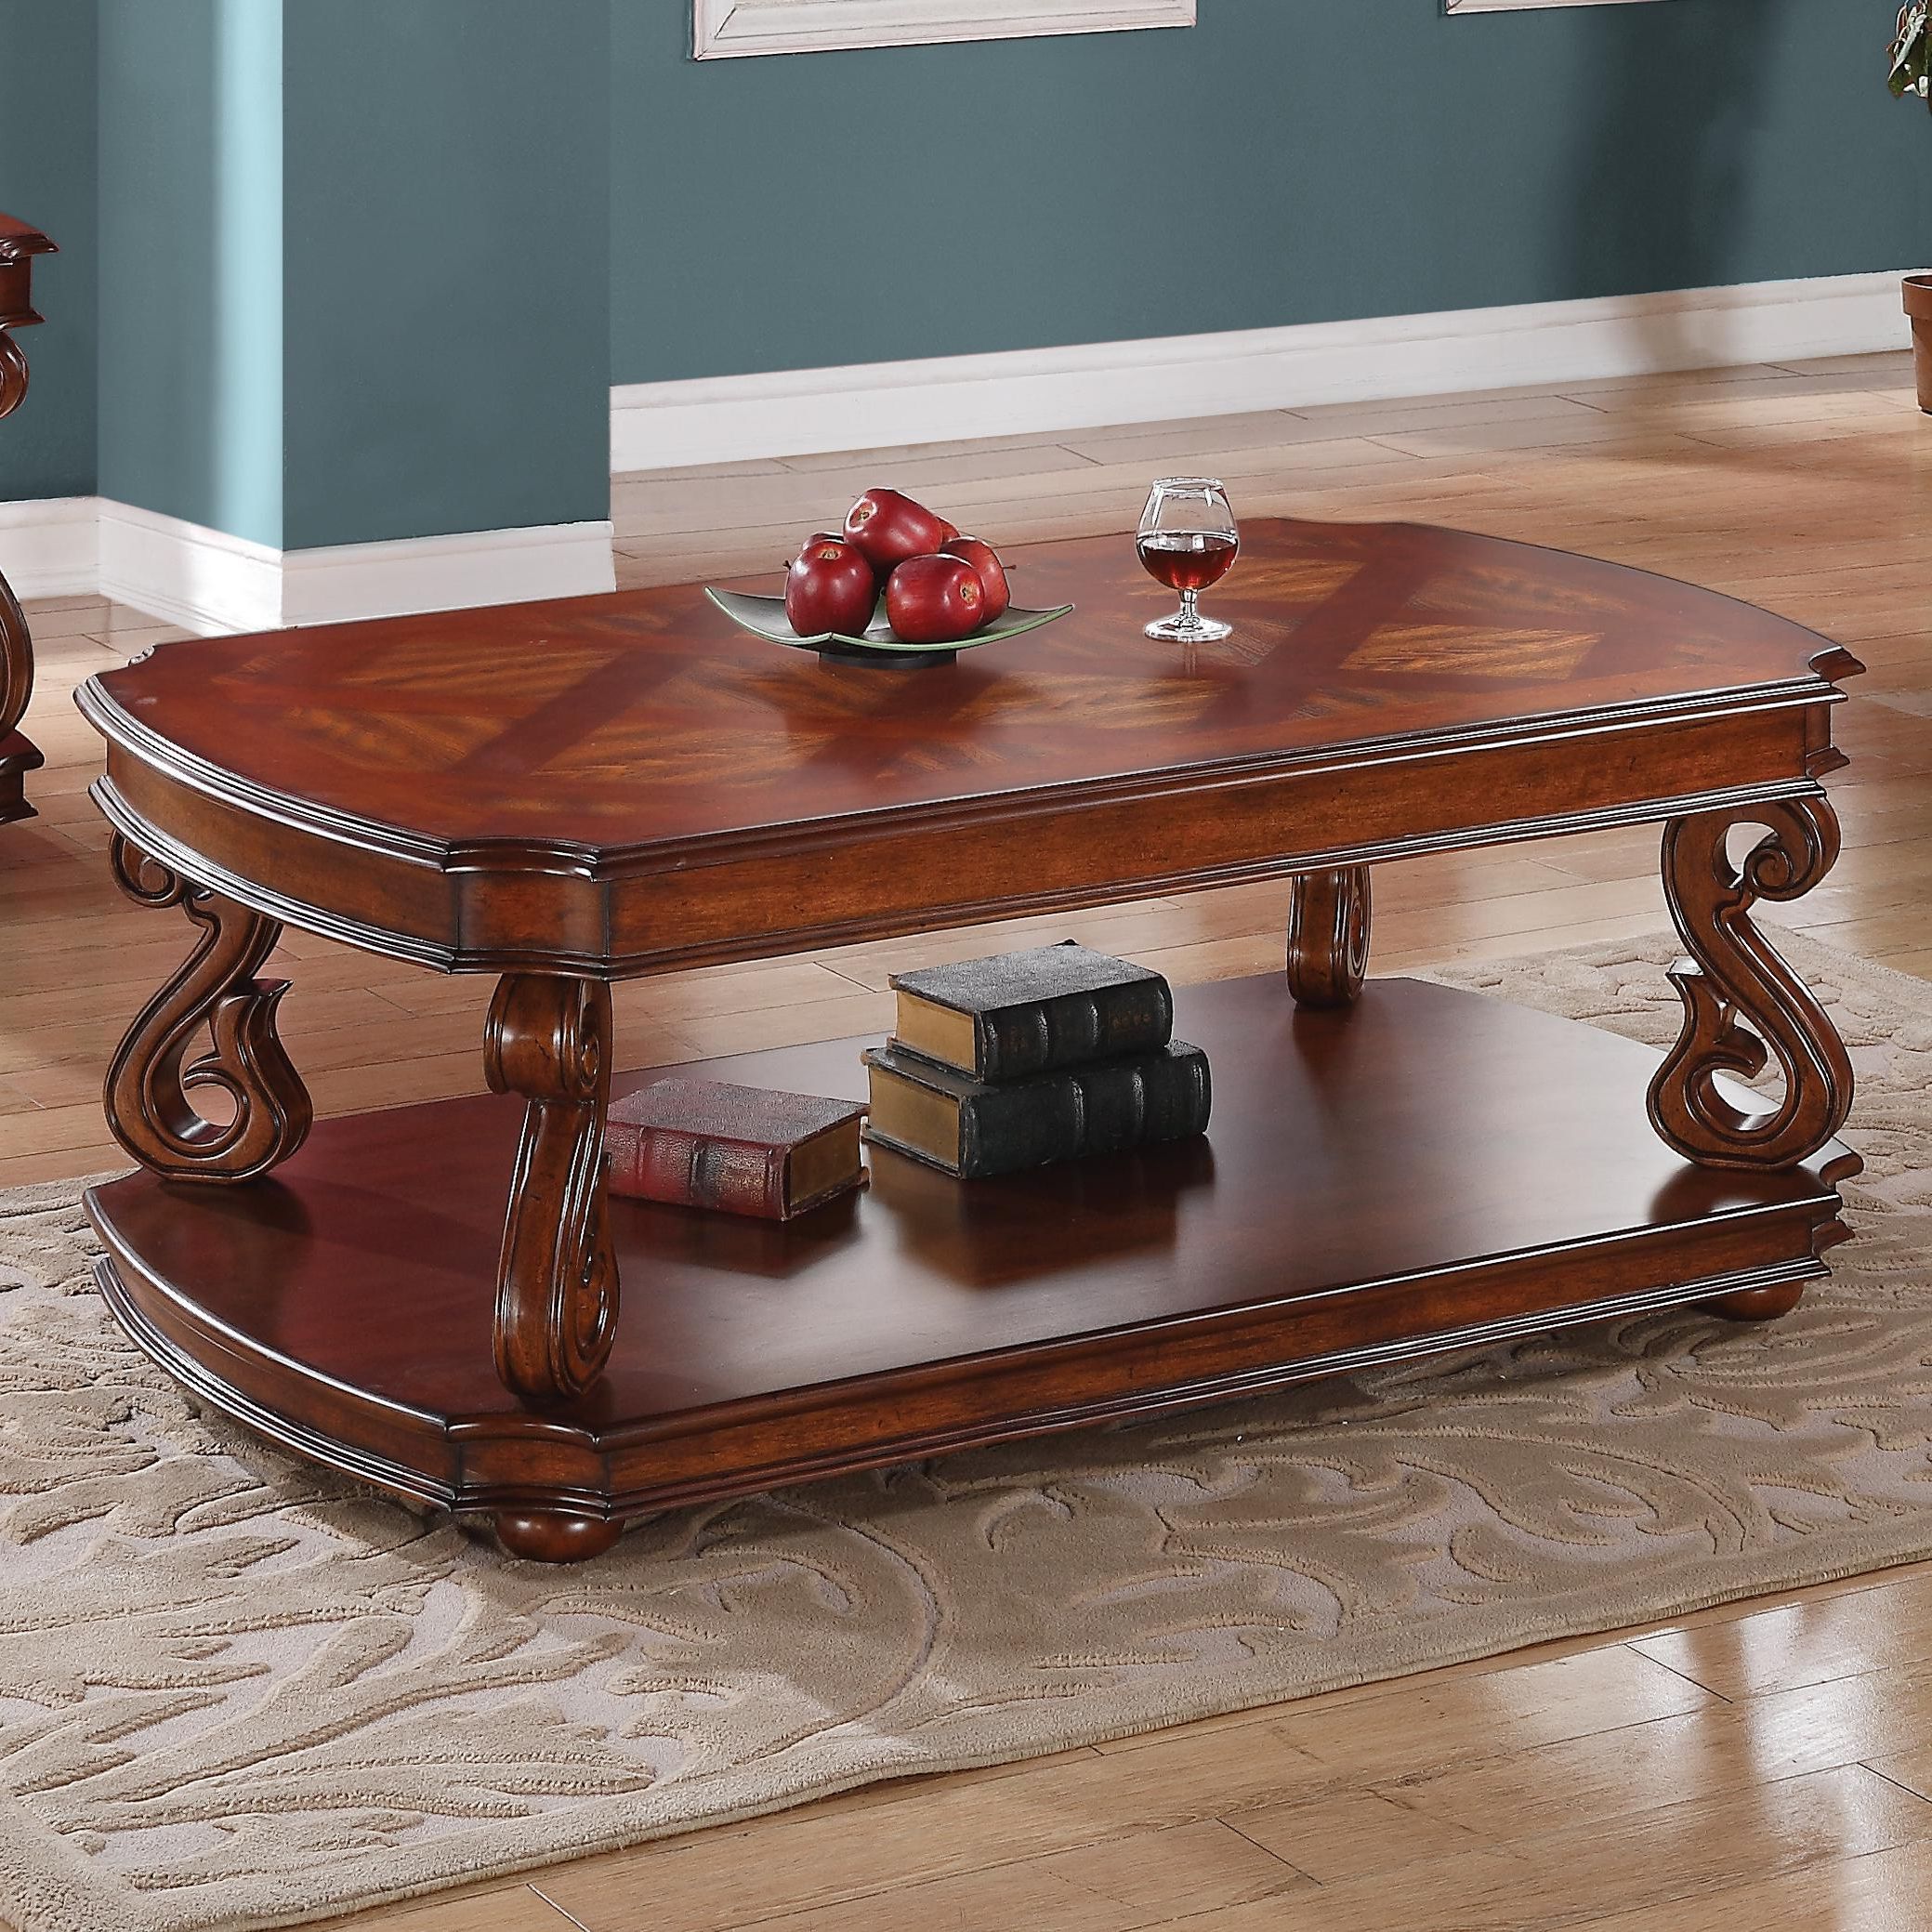 Quality Furniture At Affordable Prices In Philadelphia Main  Line Pa Inside Preferred Dark Cherry Coffee Tables (View 3 of 20)